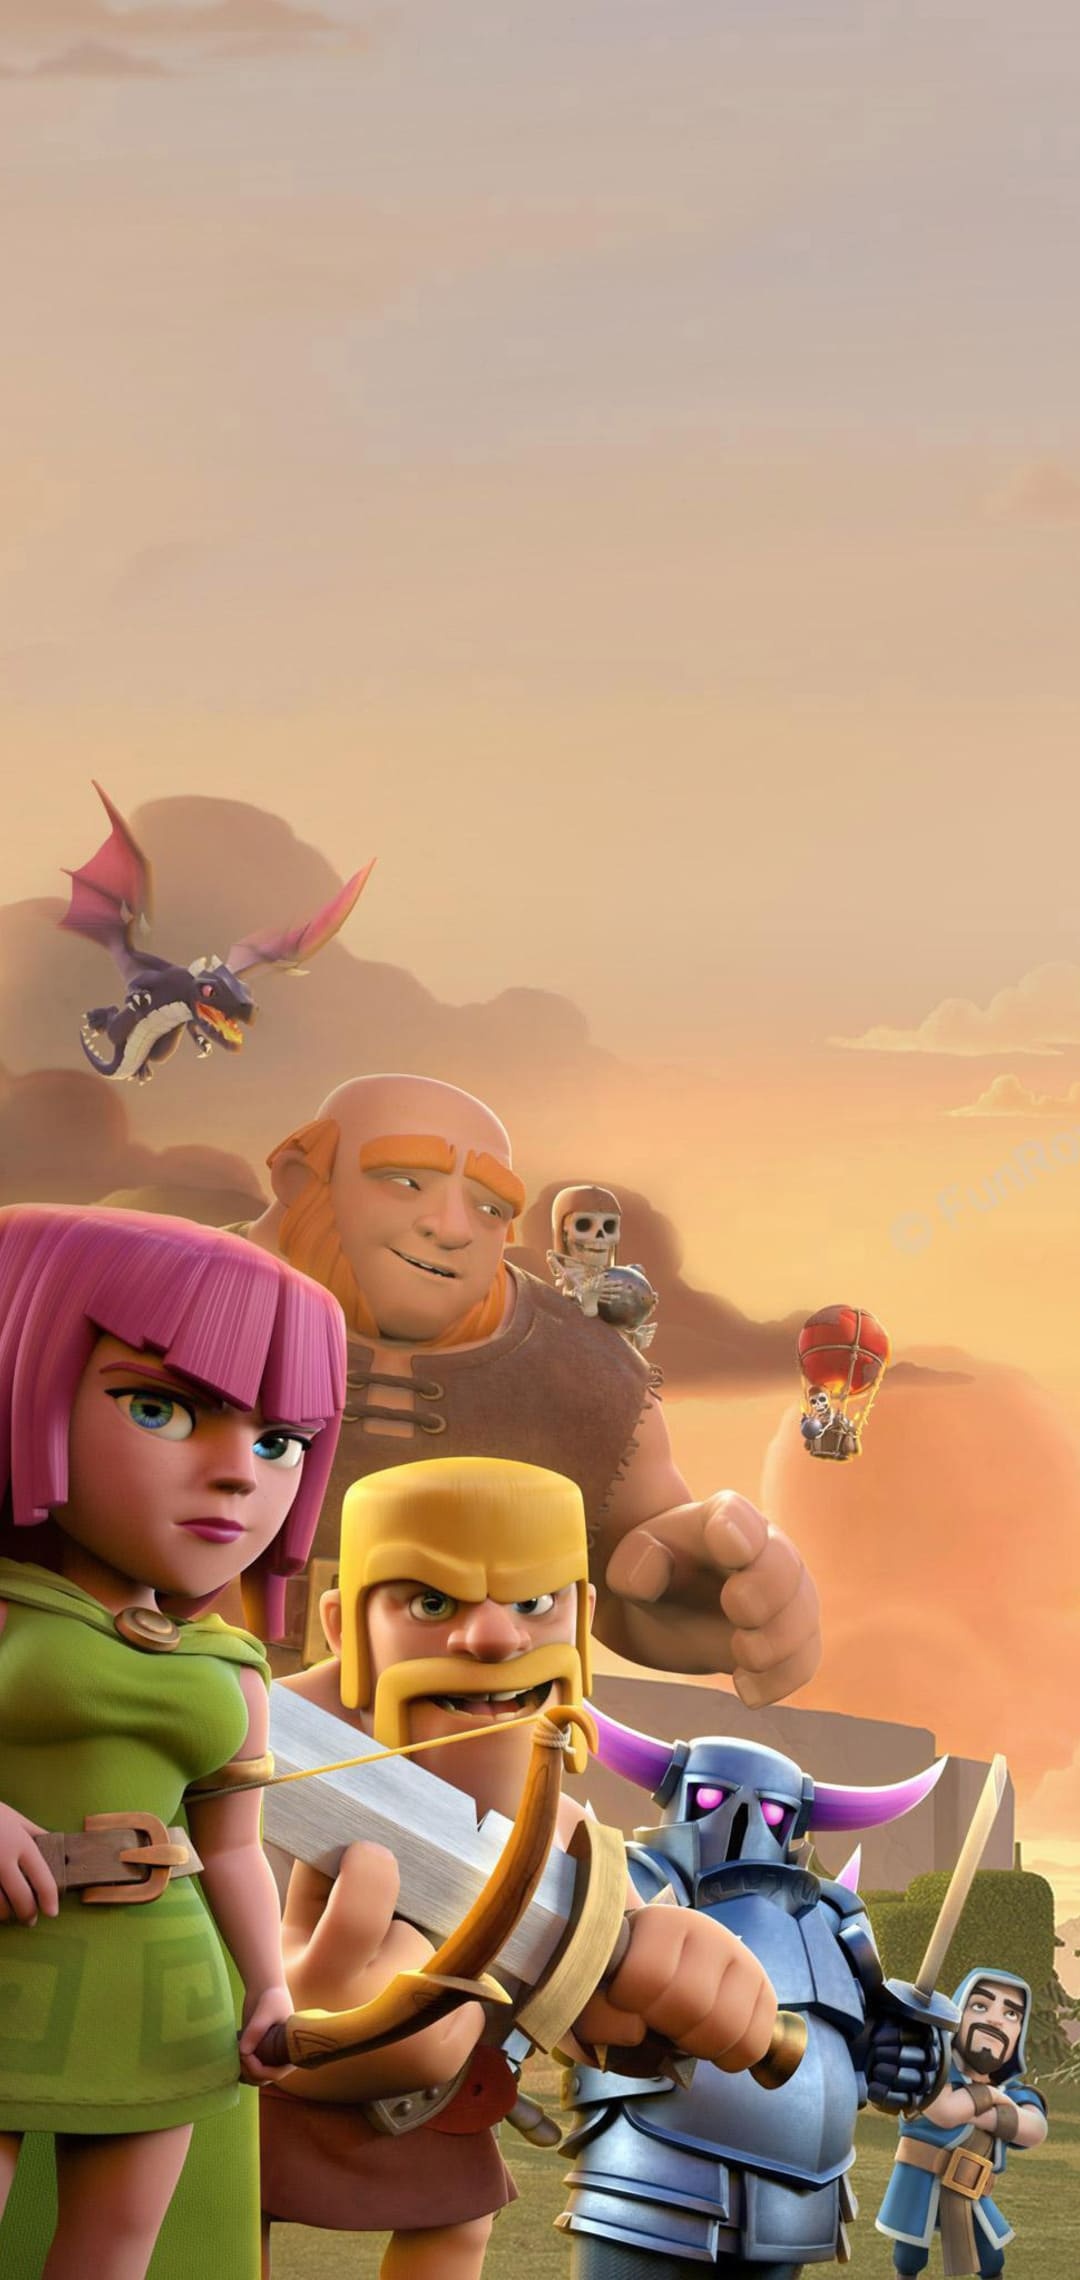 Clash of Clans: A free–to–play online multiplayer battle game by Supercell. 1080x2280 HD Wallpaper.